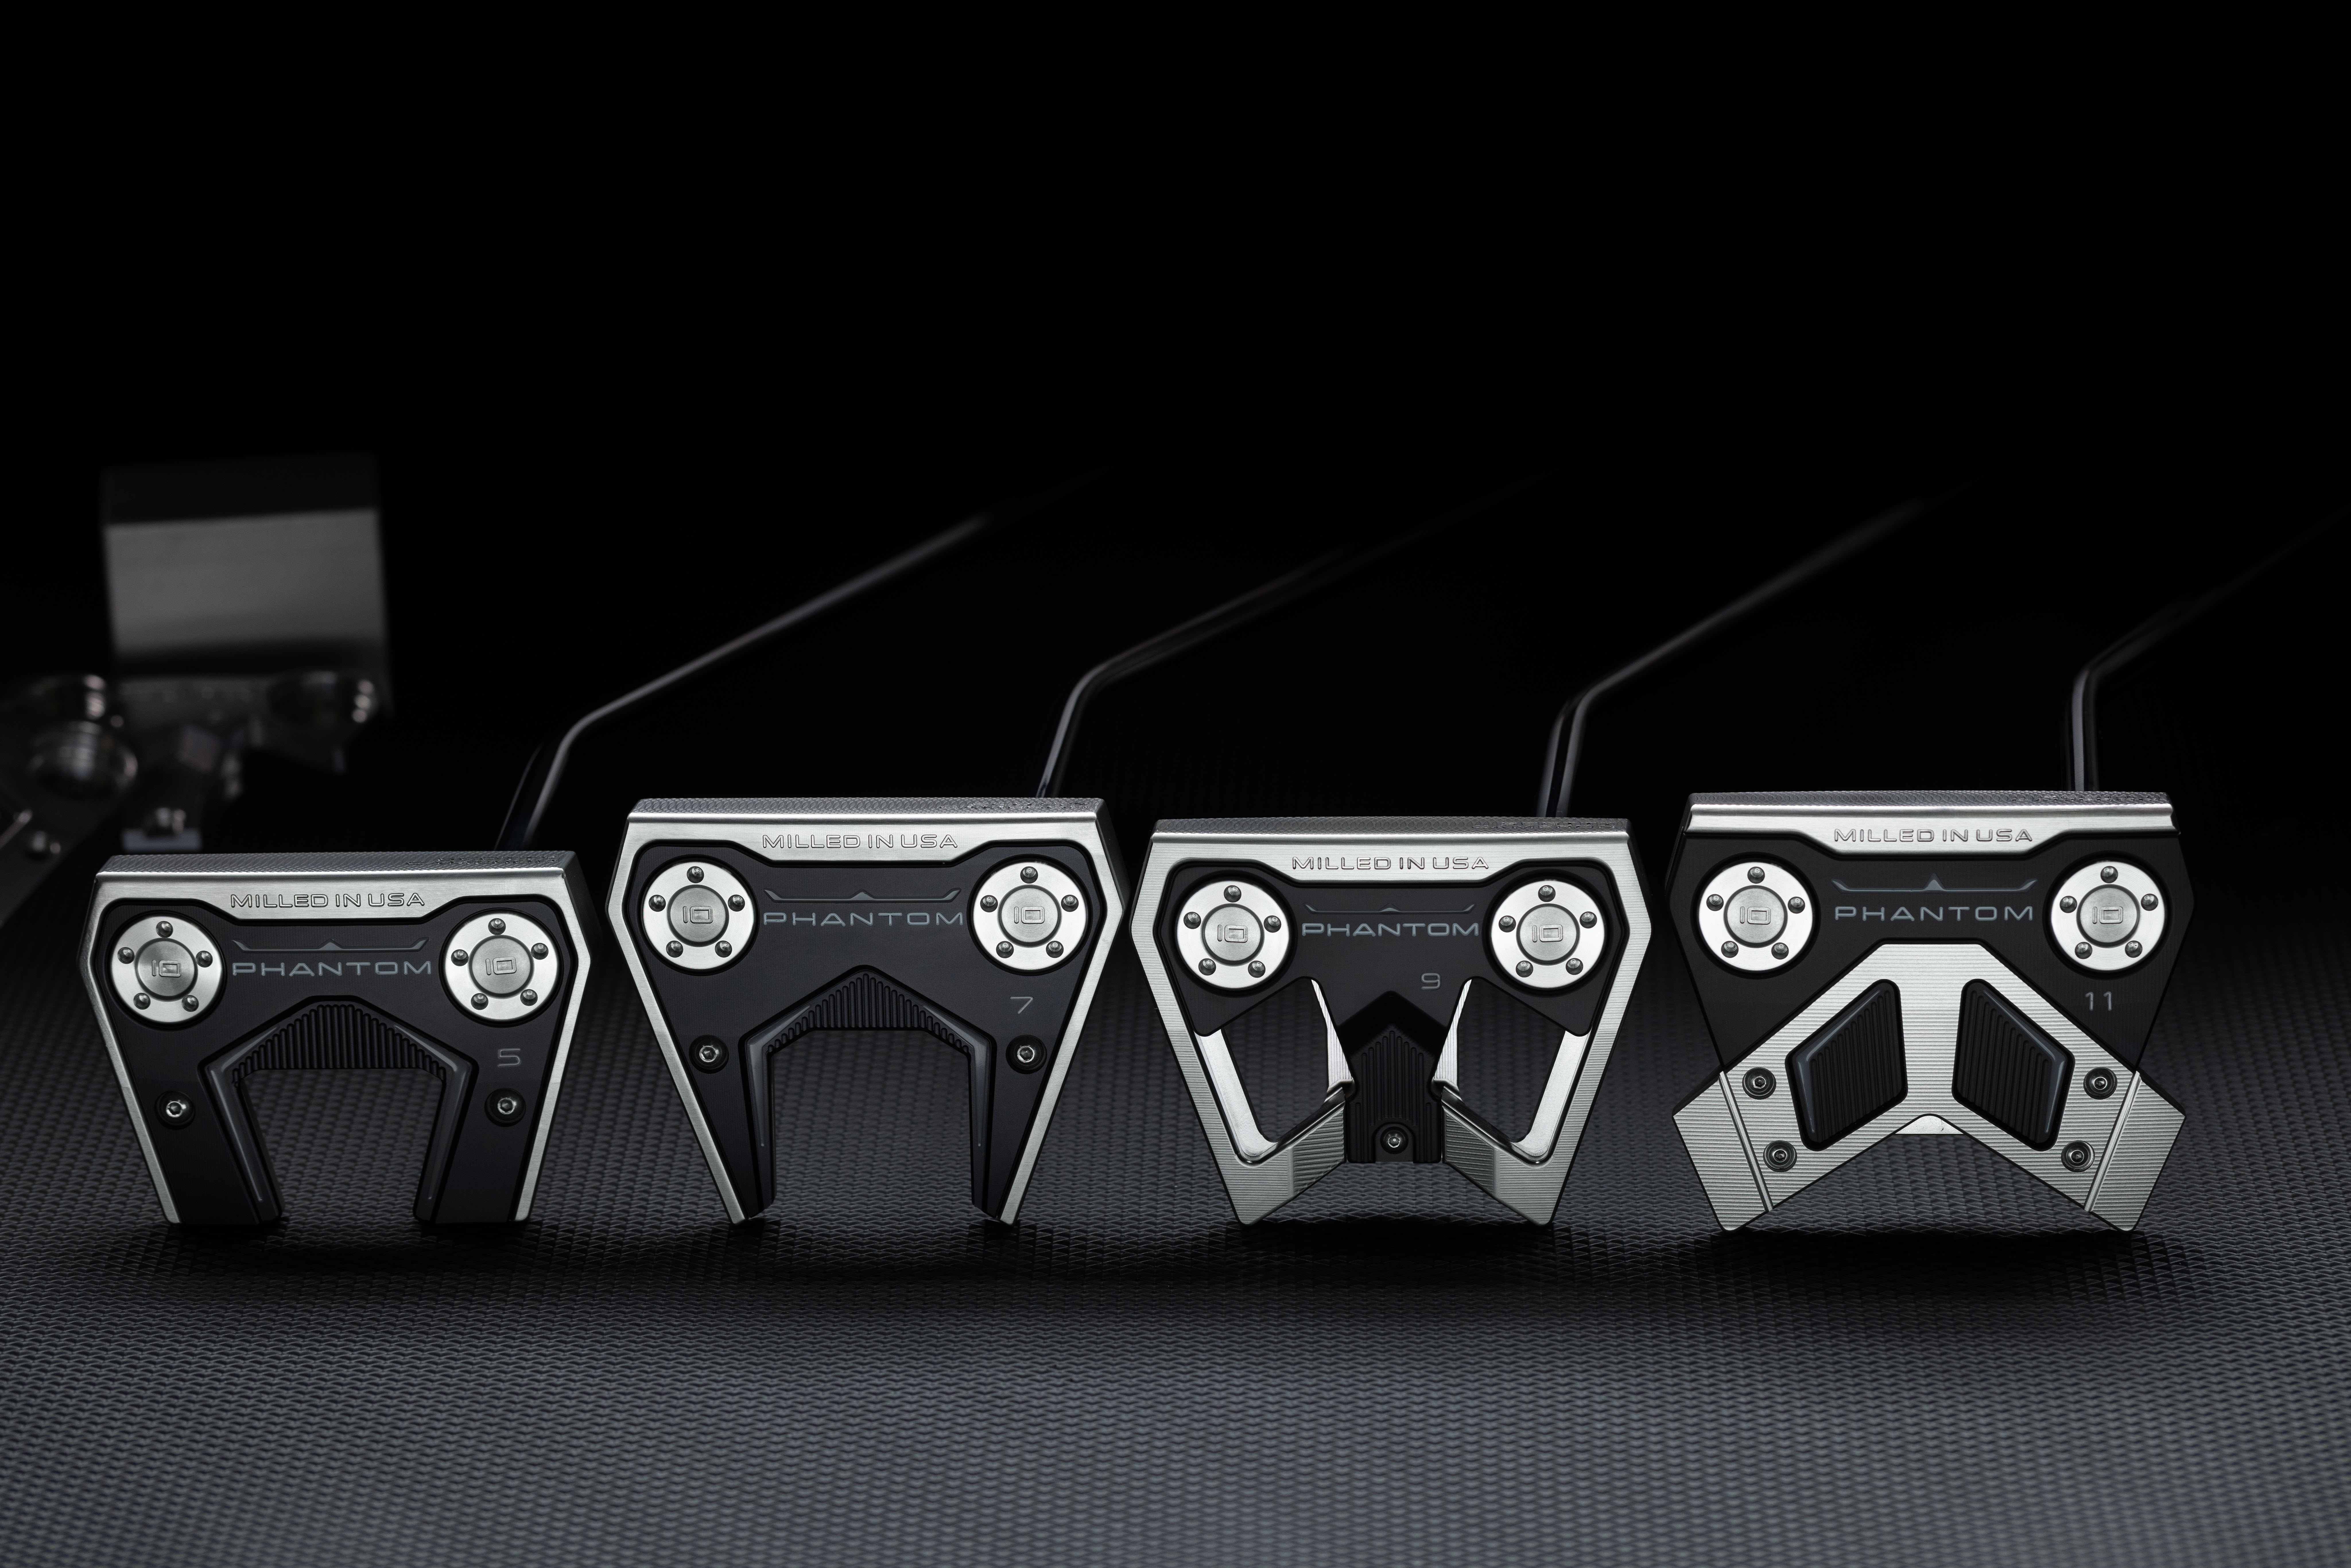 The new line of Scotty Cameron Phantom putters.